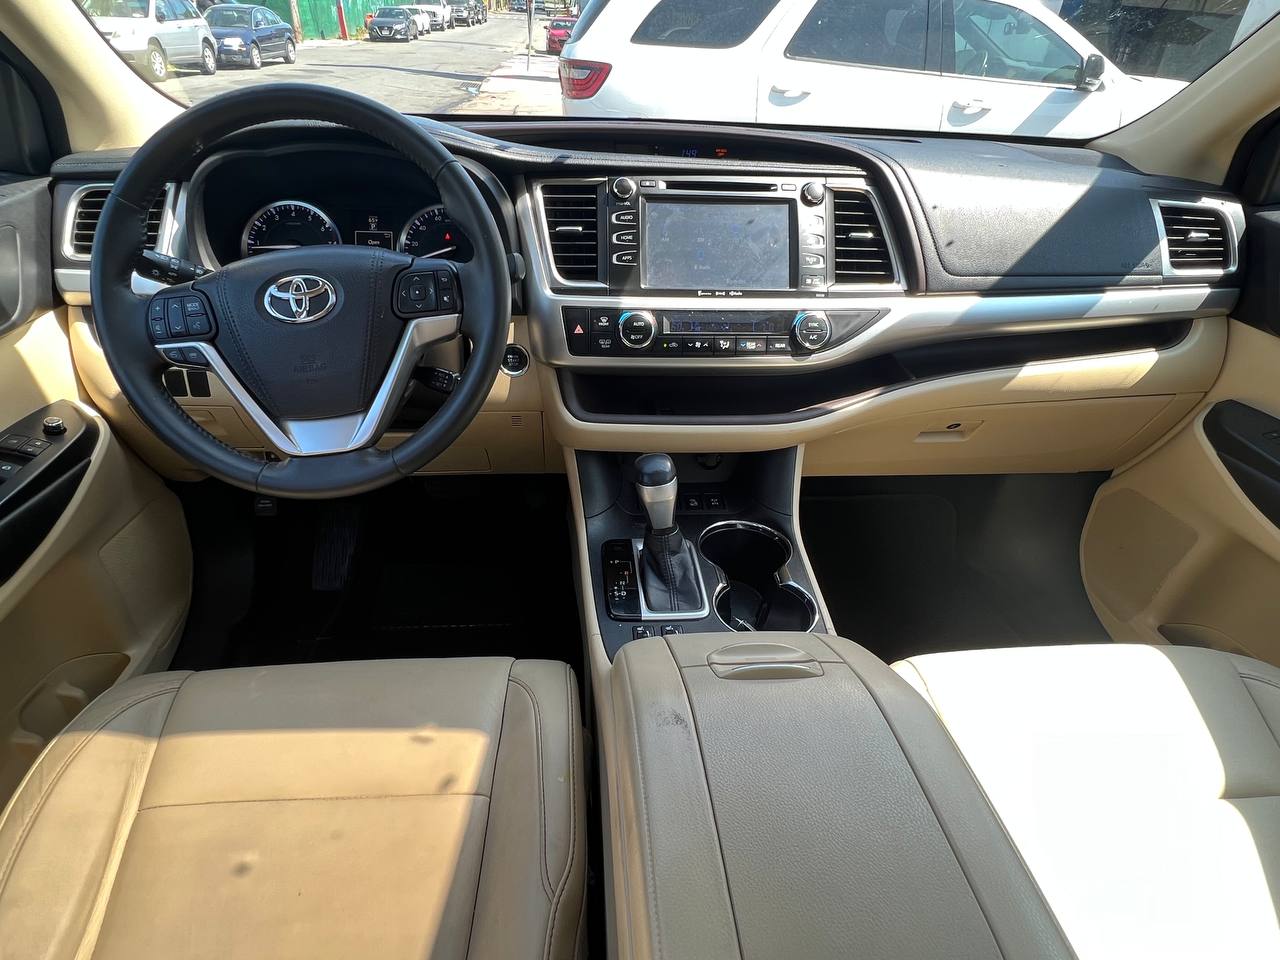 Used - Toyota Highlander XLE SUV for sale in Staten Island NY